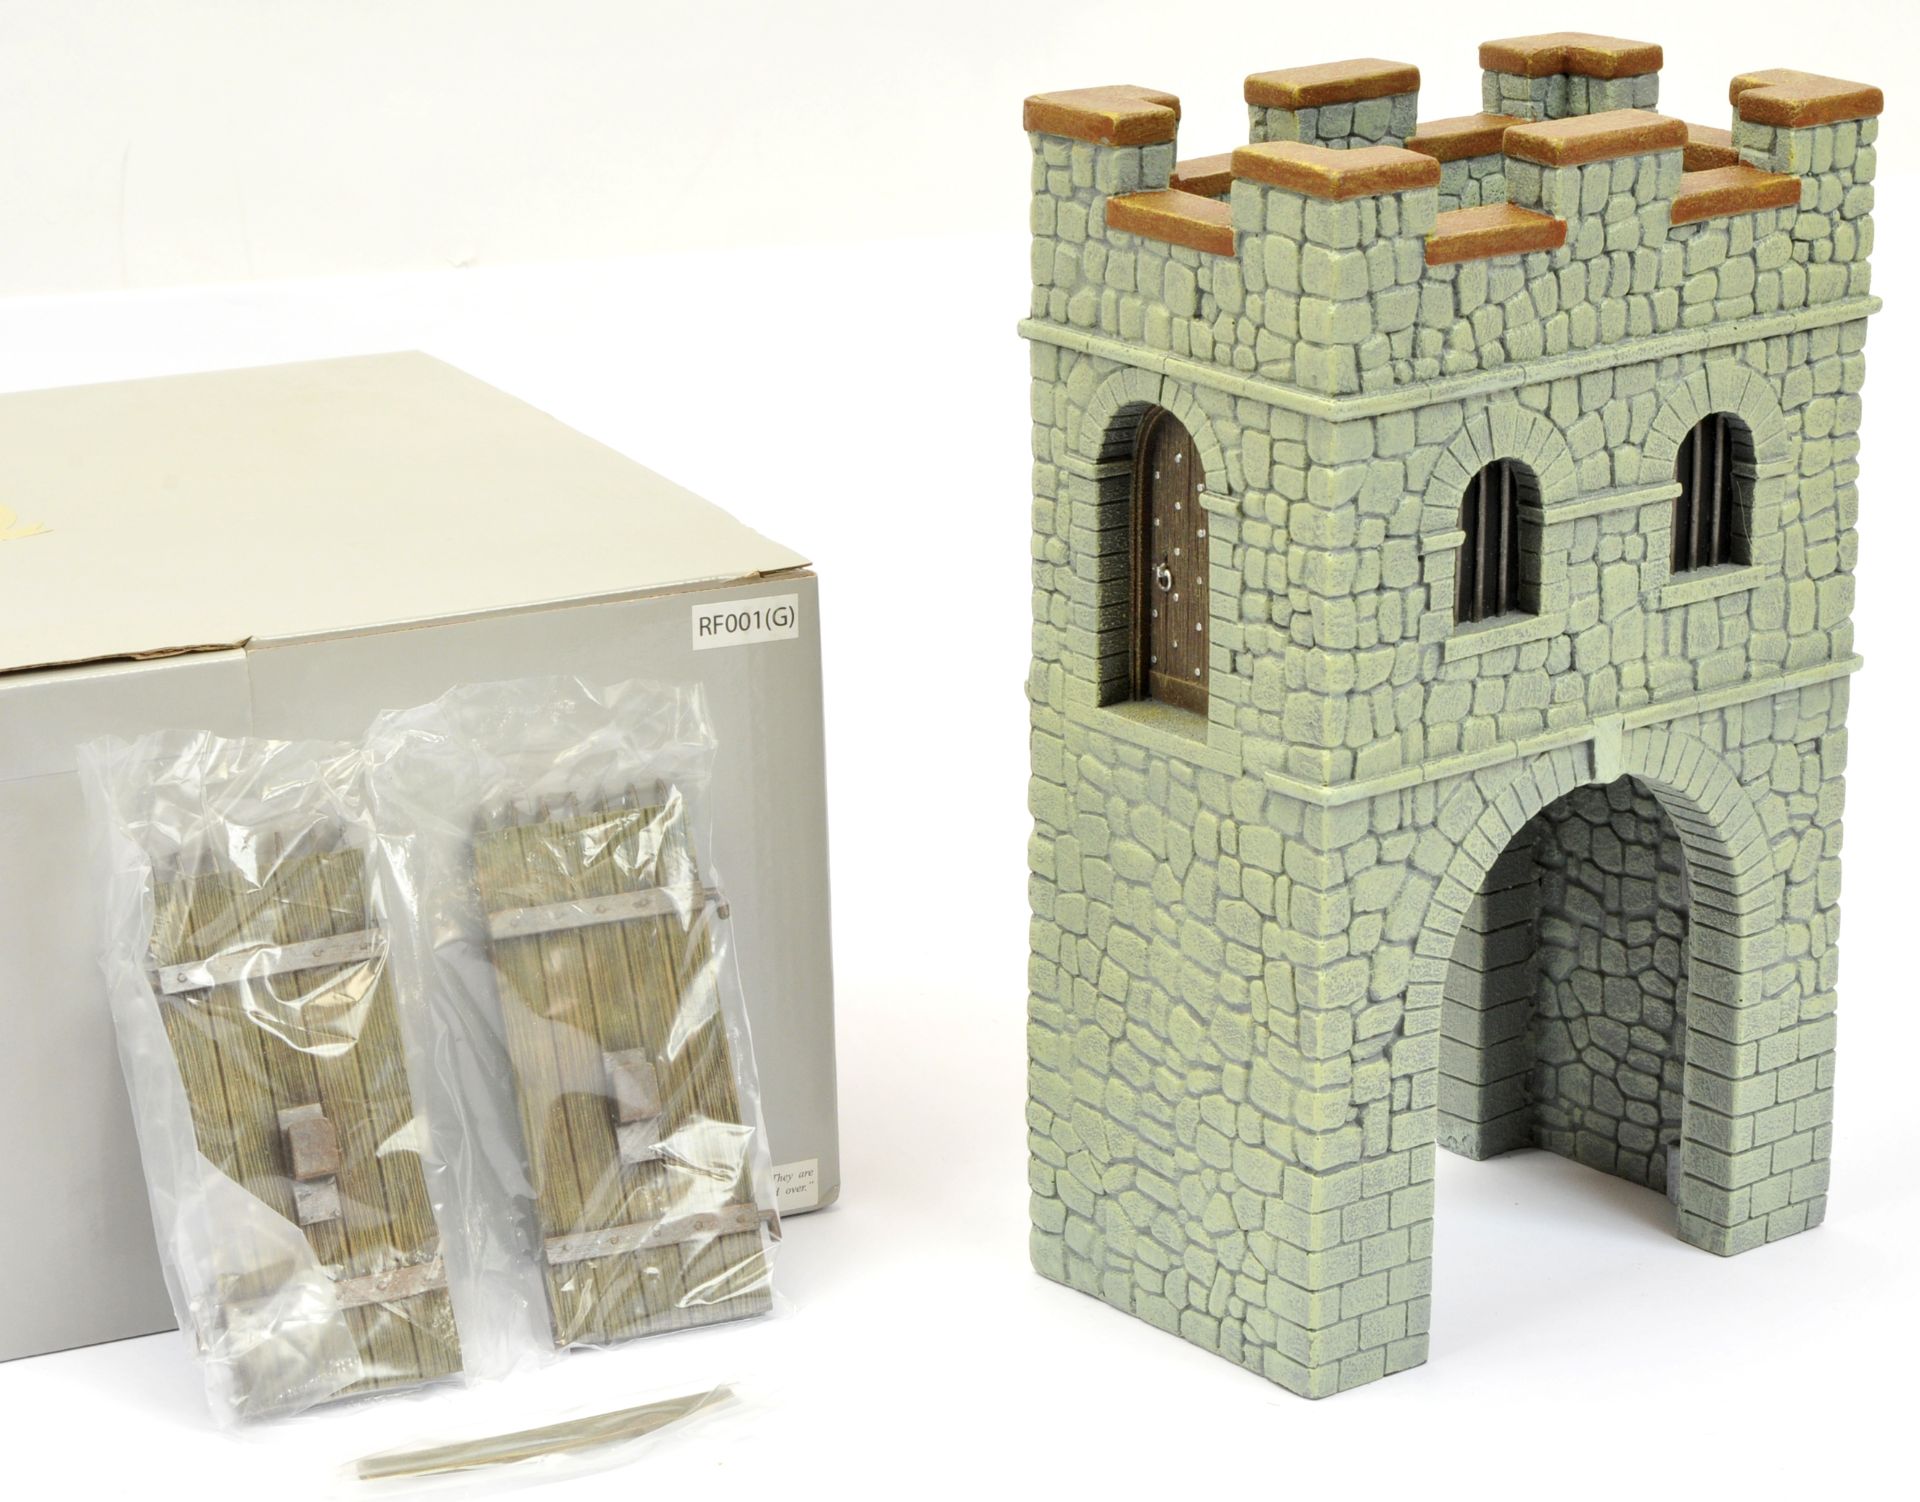 King & Country - 'The Romans' Series - RF001(G) - Roman Fort Gate Tower - Image 2 of 2